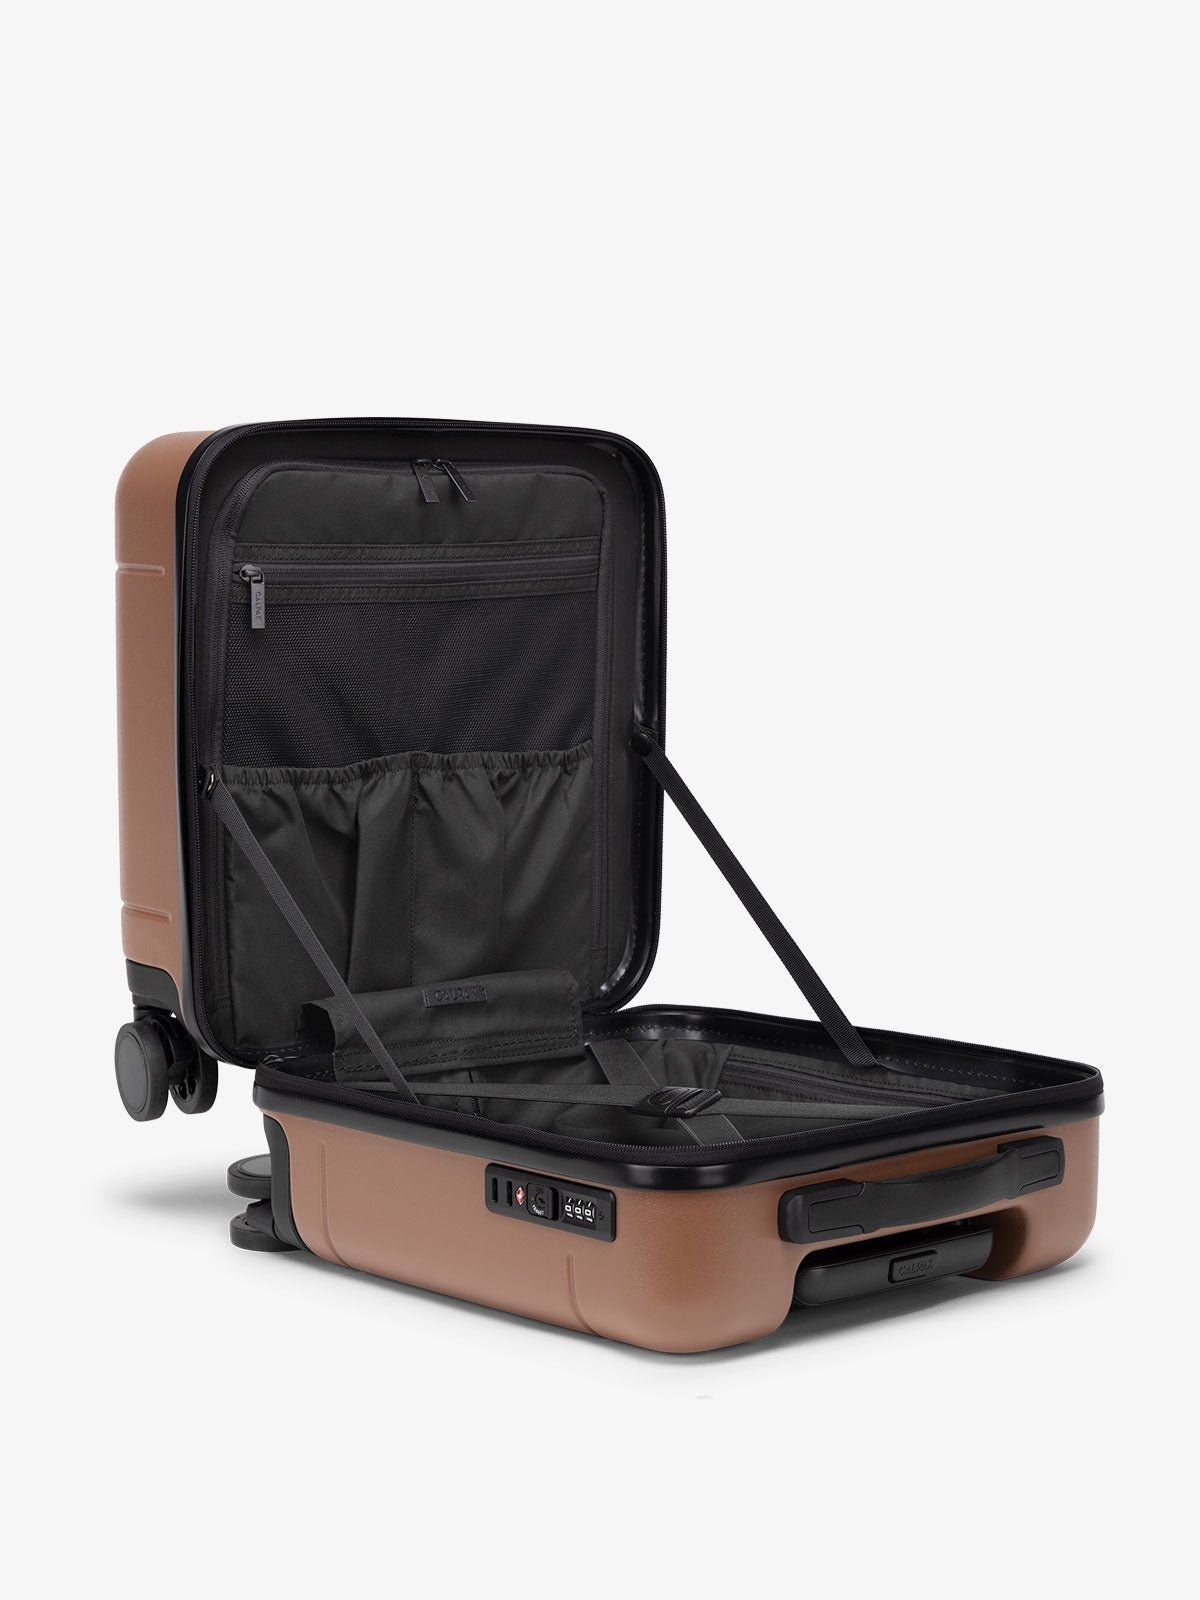 Hue mini carry on luggage with compression straps and multiple pockets